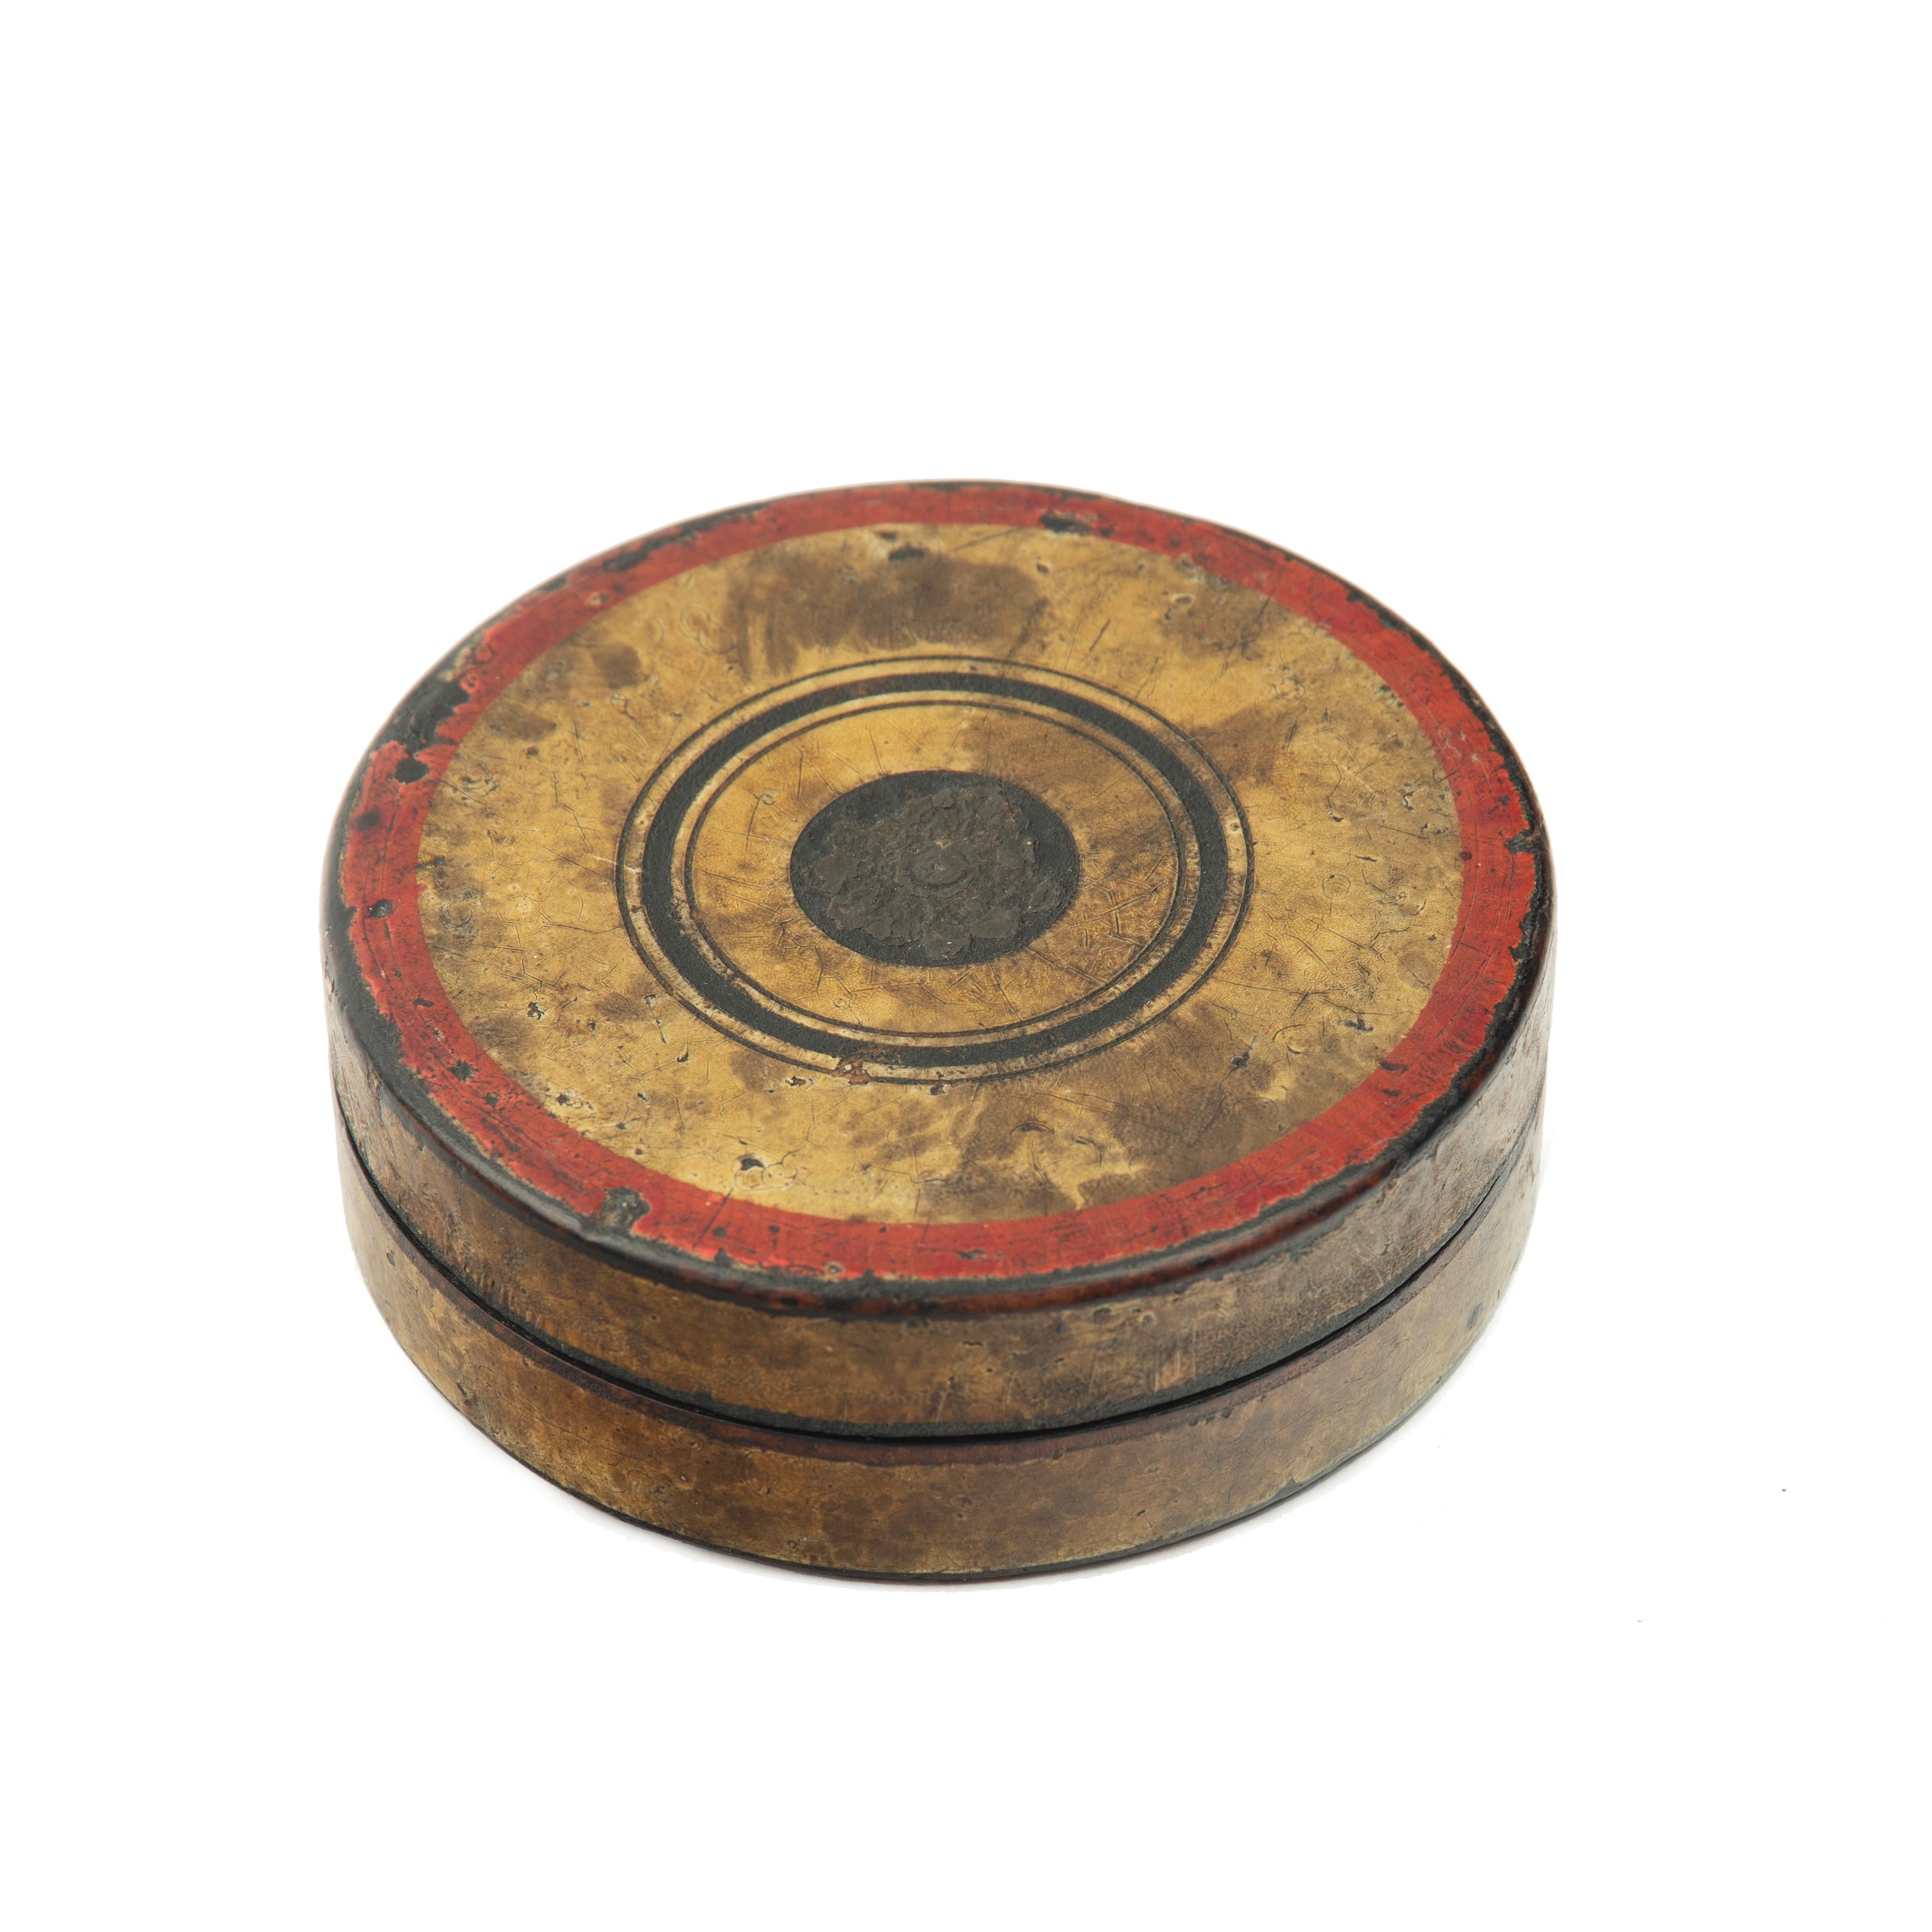 English A painted Papier-mâché snuff box inscribed with provenance to a gunner on Victor